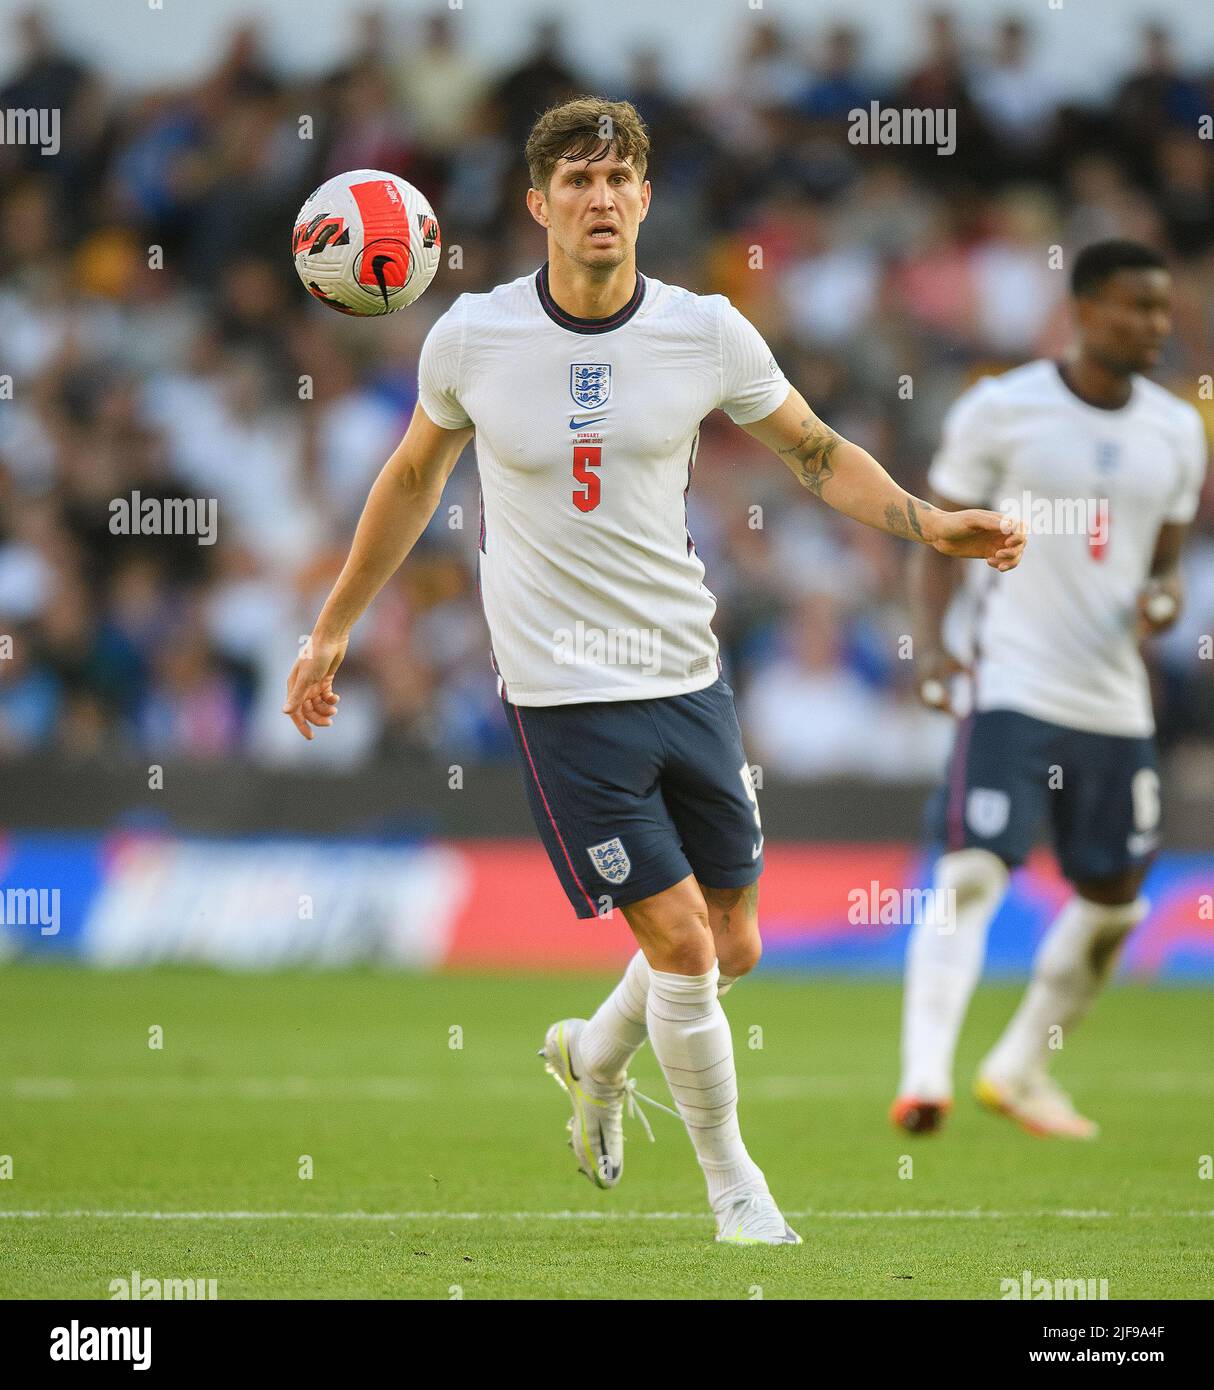 England v Hungary - UEFA Nations League. 14/6/22. John Stones during the Nations League match against Hungary. Pic : Mark Pain / Alamy. Stock Photo